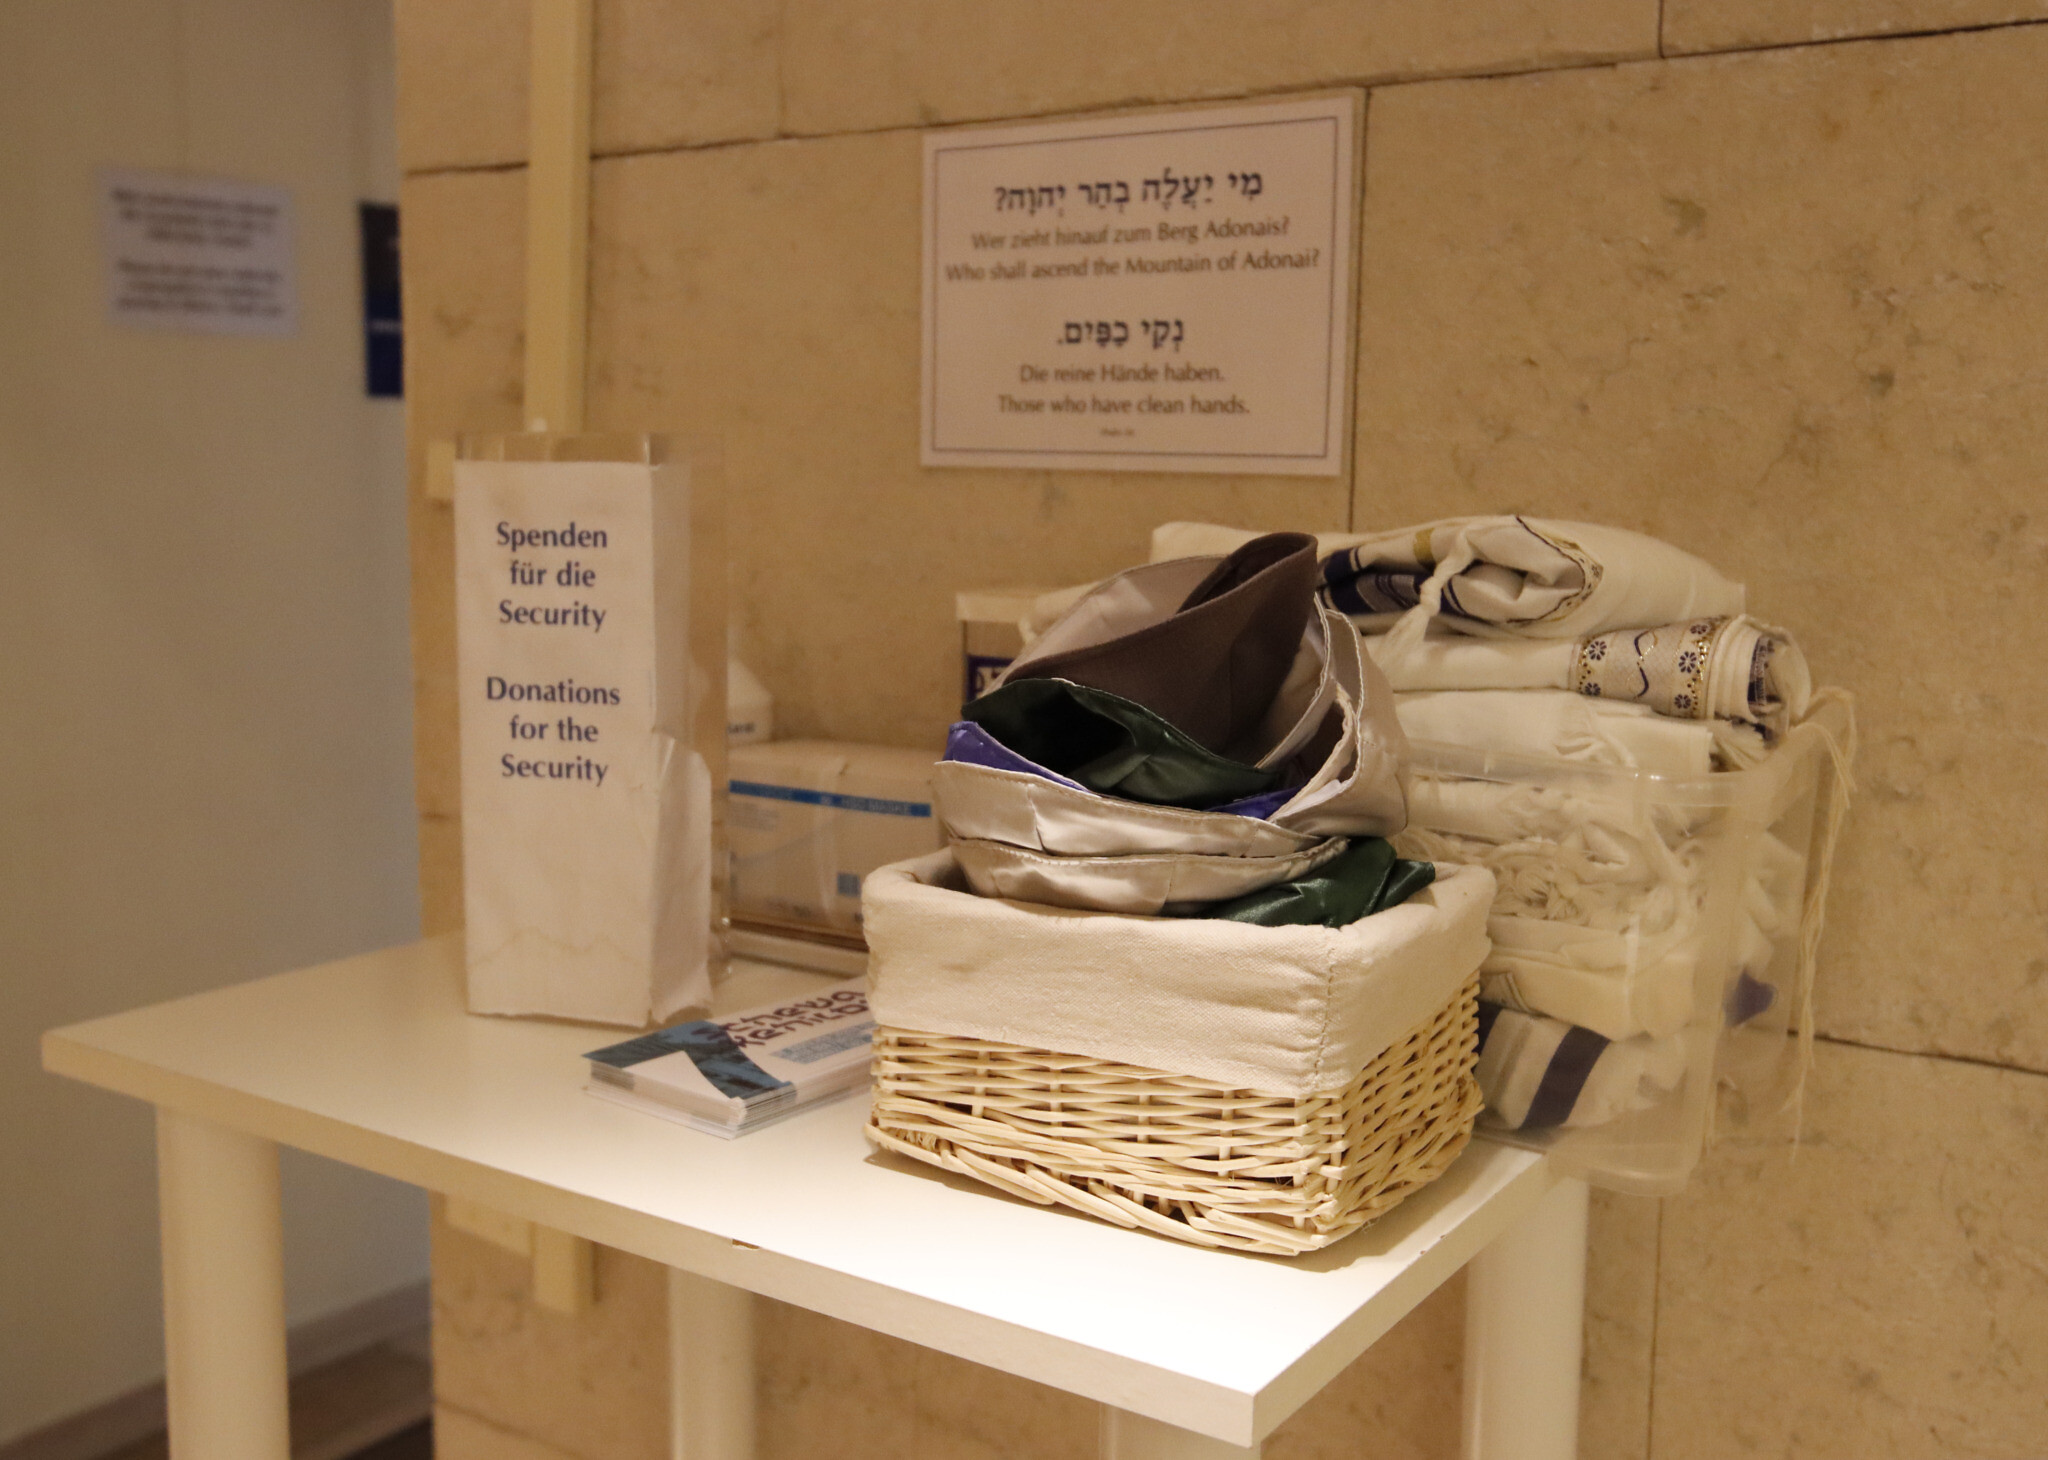 Kippahs and other items are available at Or Chadasch in Vienna, Austria, on Friday, June 24, 2022. (Raquel G. Frohlich)